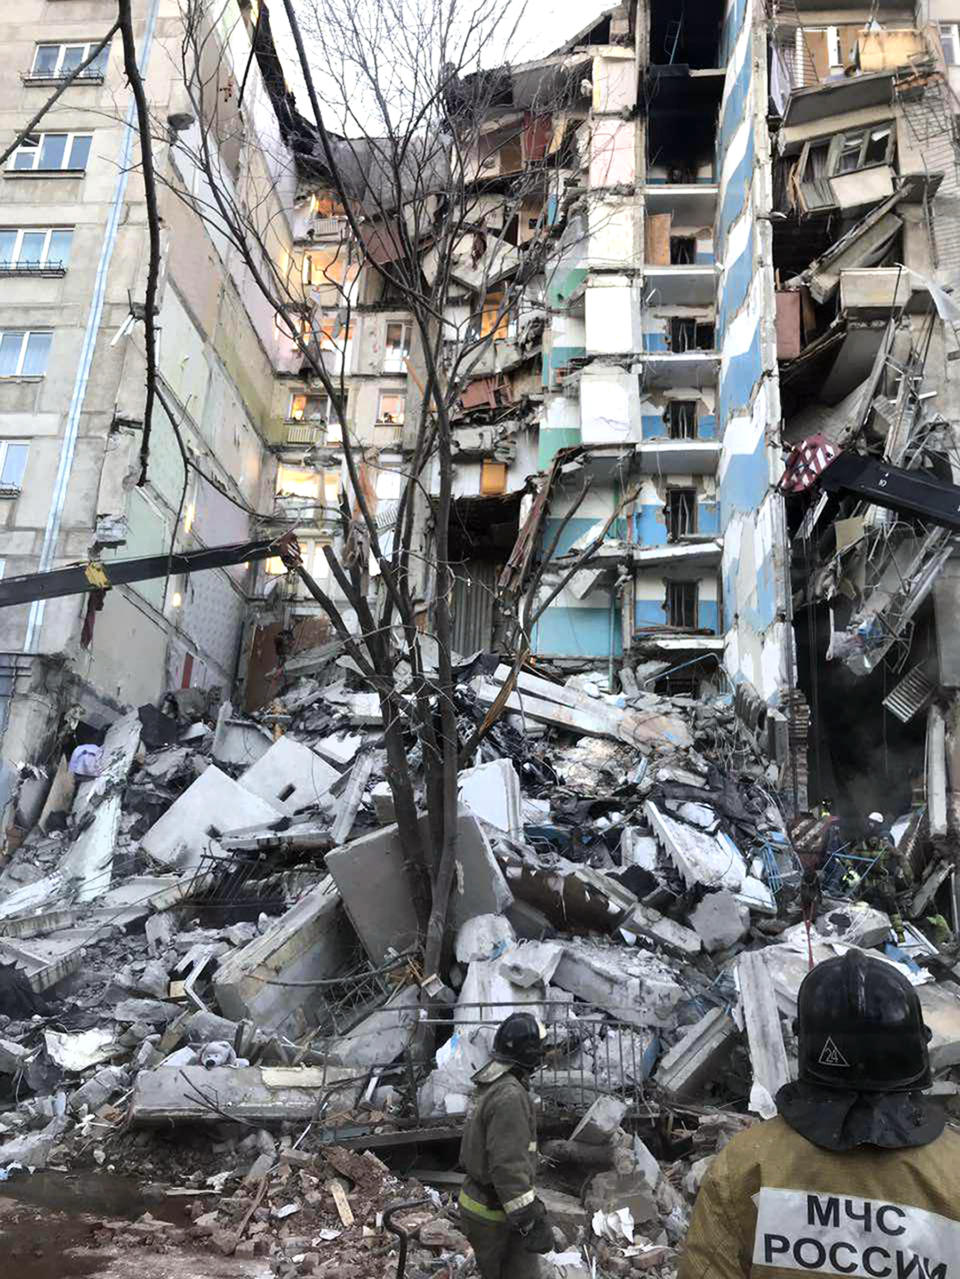 This image provided by the Russian Emergency Situations Ministry taken from tv footage, shows Emergency Situations employees working at the scene of a collapsed section of an apartment building in Magnitogorsk, a city of 400,000 about 1,400 kilometers (870 miles) southeast of Moscow, Russia, Monday, Dec. 31, 2018. Russian emergency officials say that at least four people have died after sections of an apartment building collapsed after an apparent gas explosion in the Ural Mountains region. (Chelyabinsk Region Governor Press Service photo via AP)